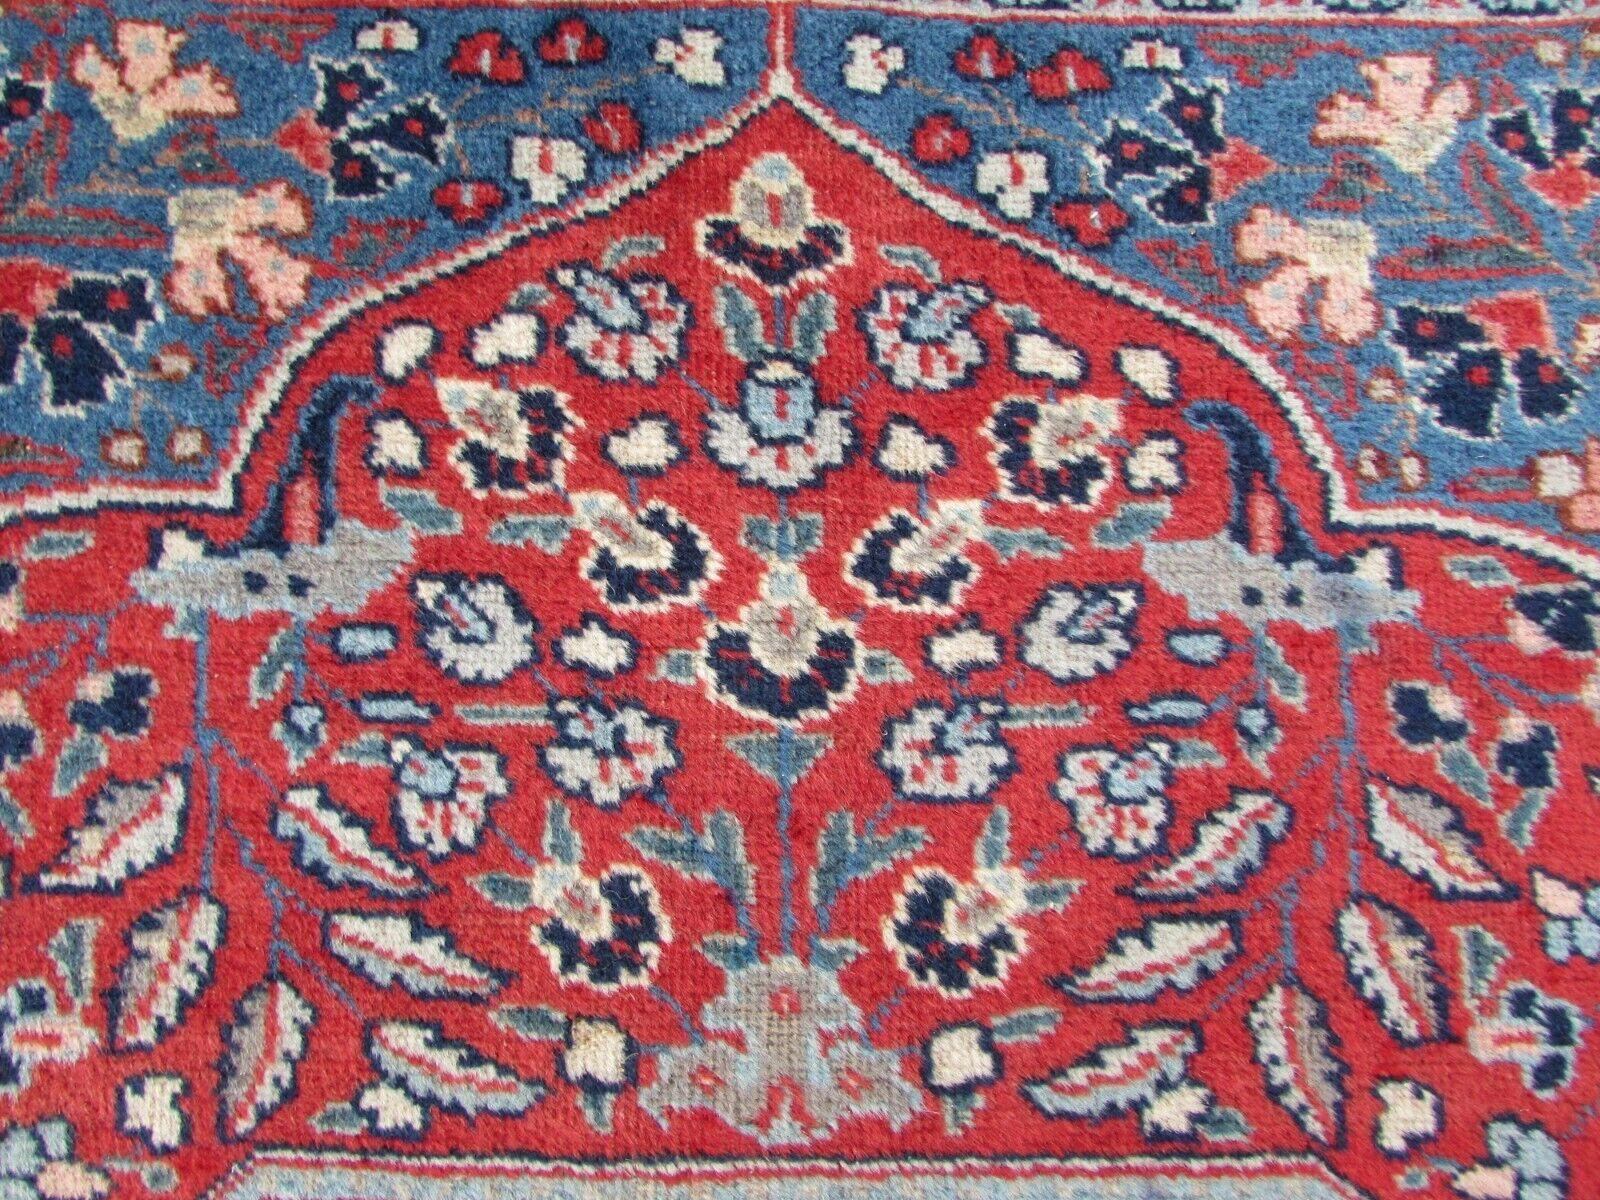 Handmade Vintage Persian Style Kazvin Rug 9.3' x 12.3', 1970s - 1Q68 For Sale 3